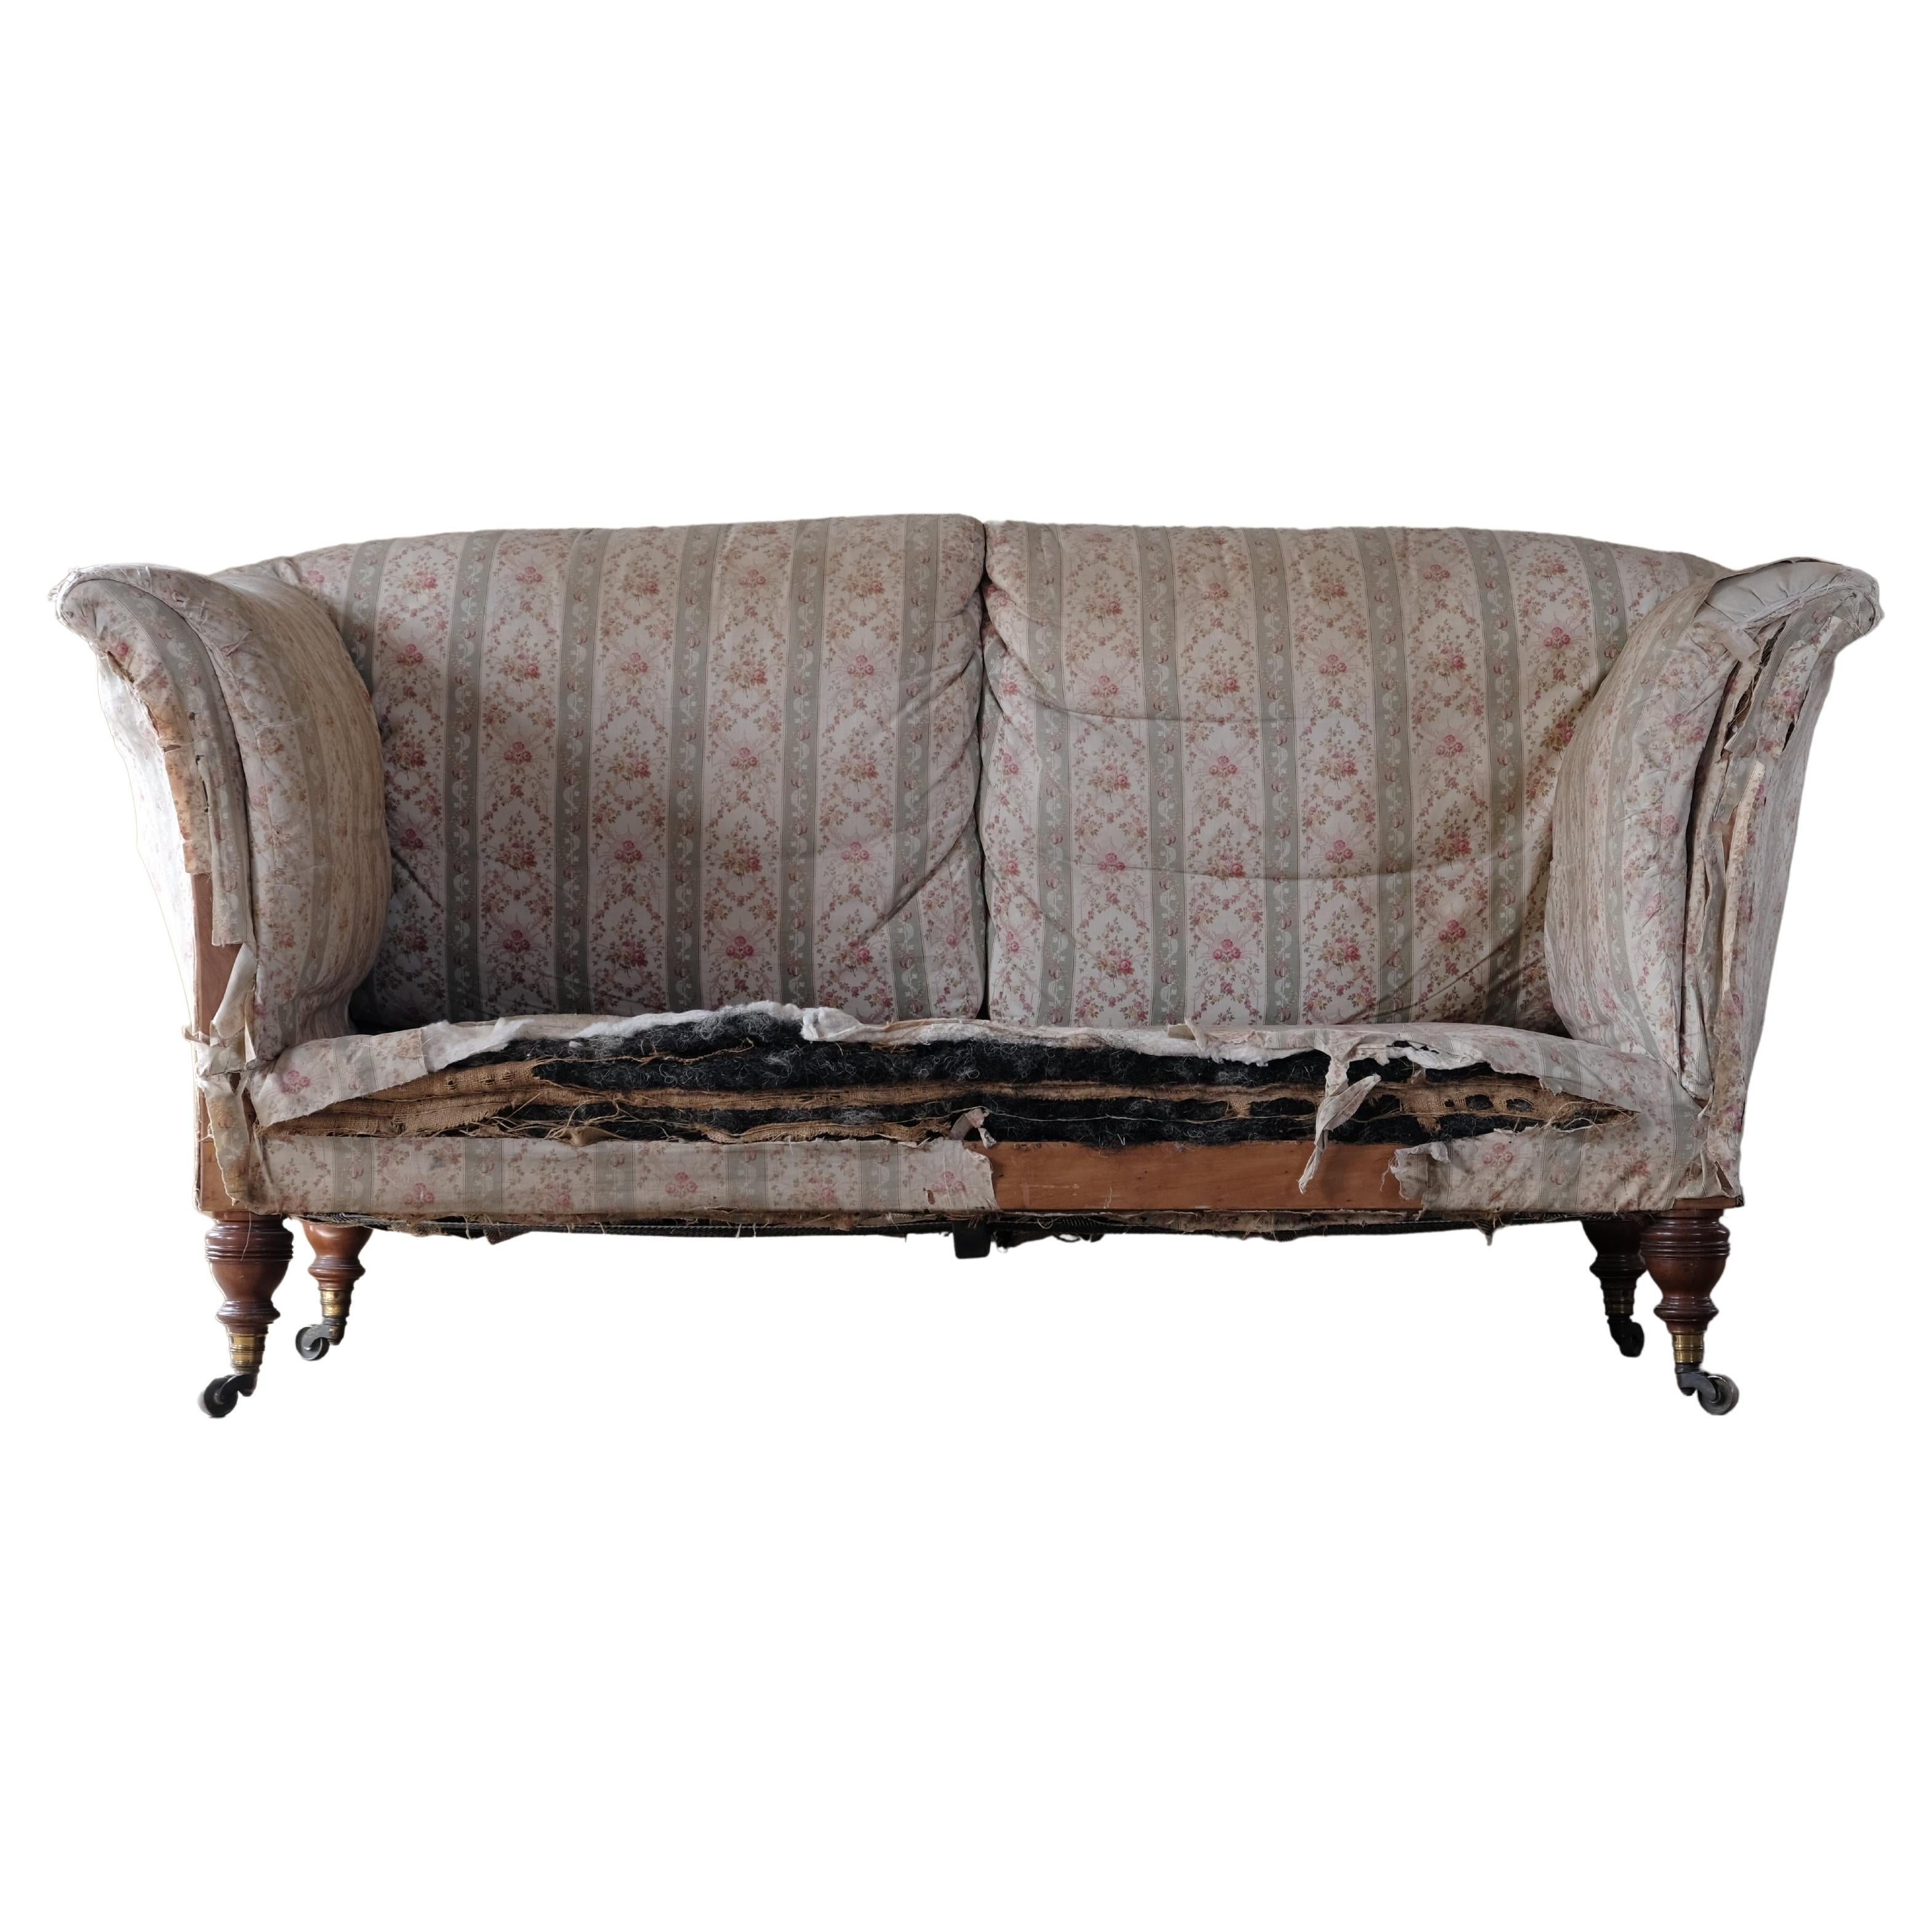 19th Century Howard & Sons Grantley Sofa c1880 For Sale